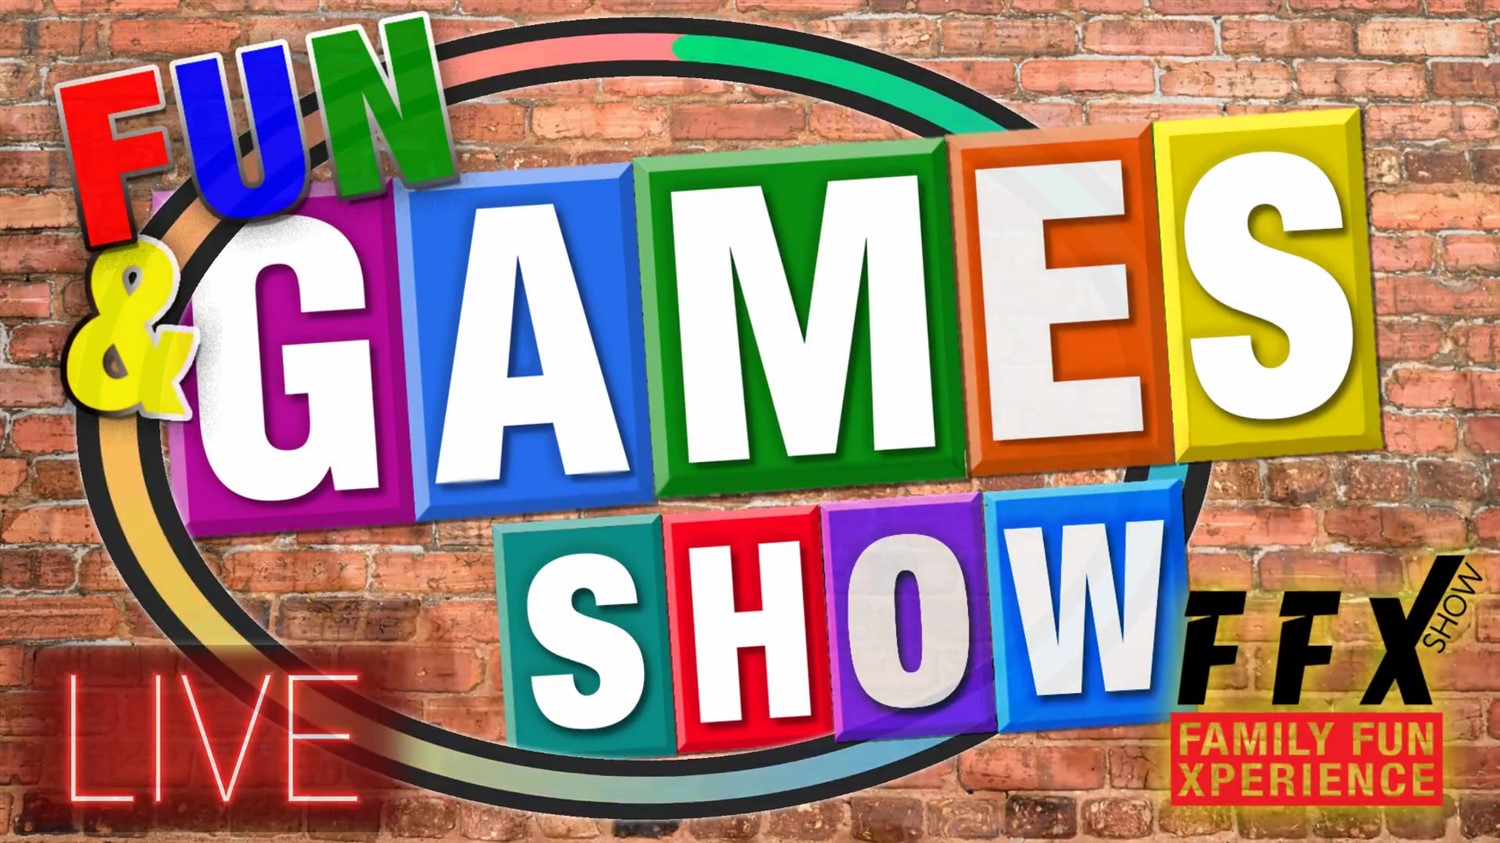 FUN & GAMES SHOW! 5 Star Fun for the whole family! on Sep 29, 19:00@FFX Theatre - Pick a seat, Buy tickets and Get information on Family Fun Xperience tickets.ffxshow.org